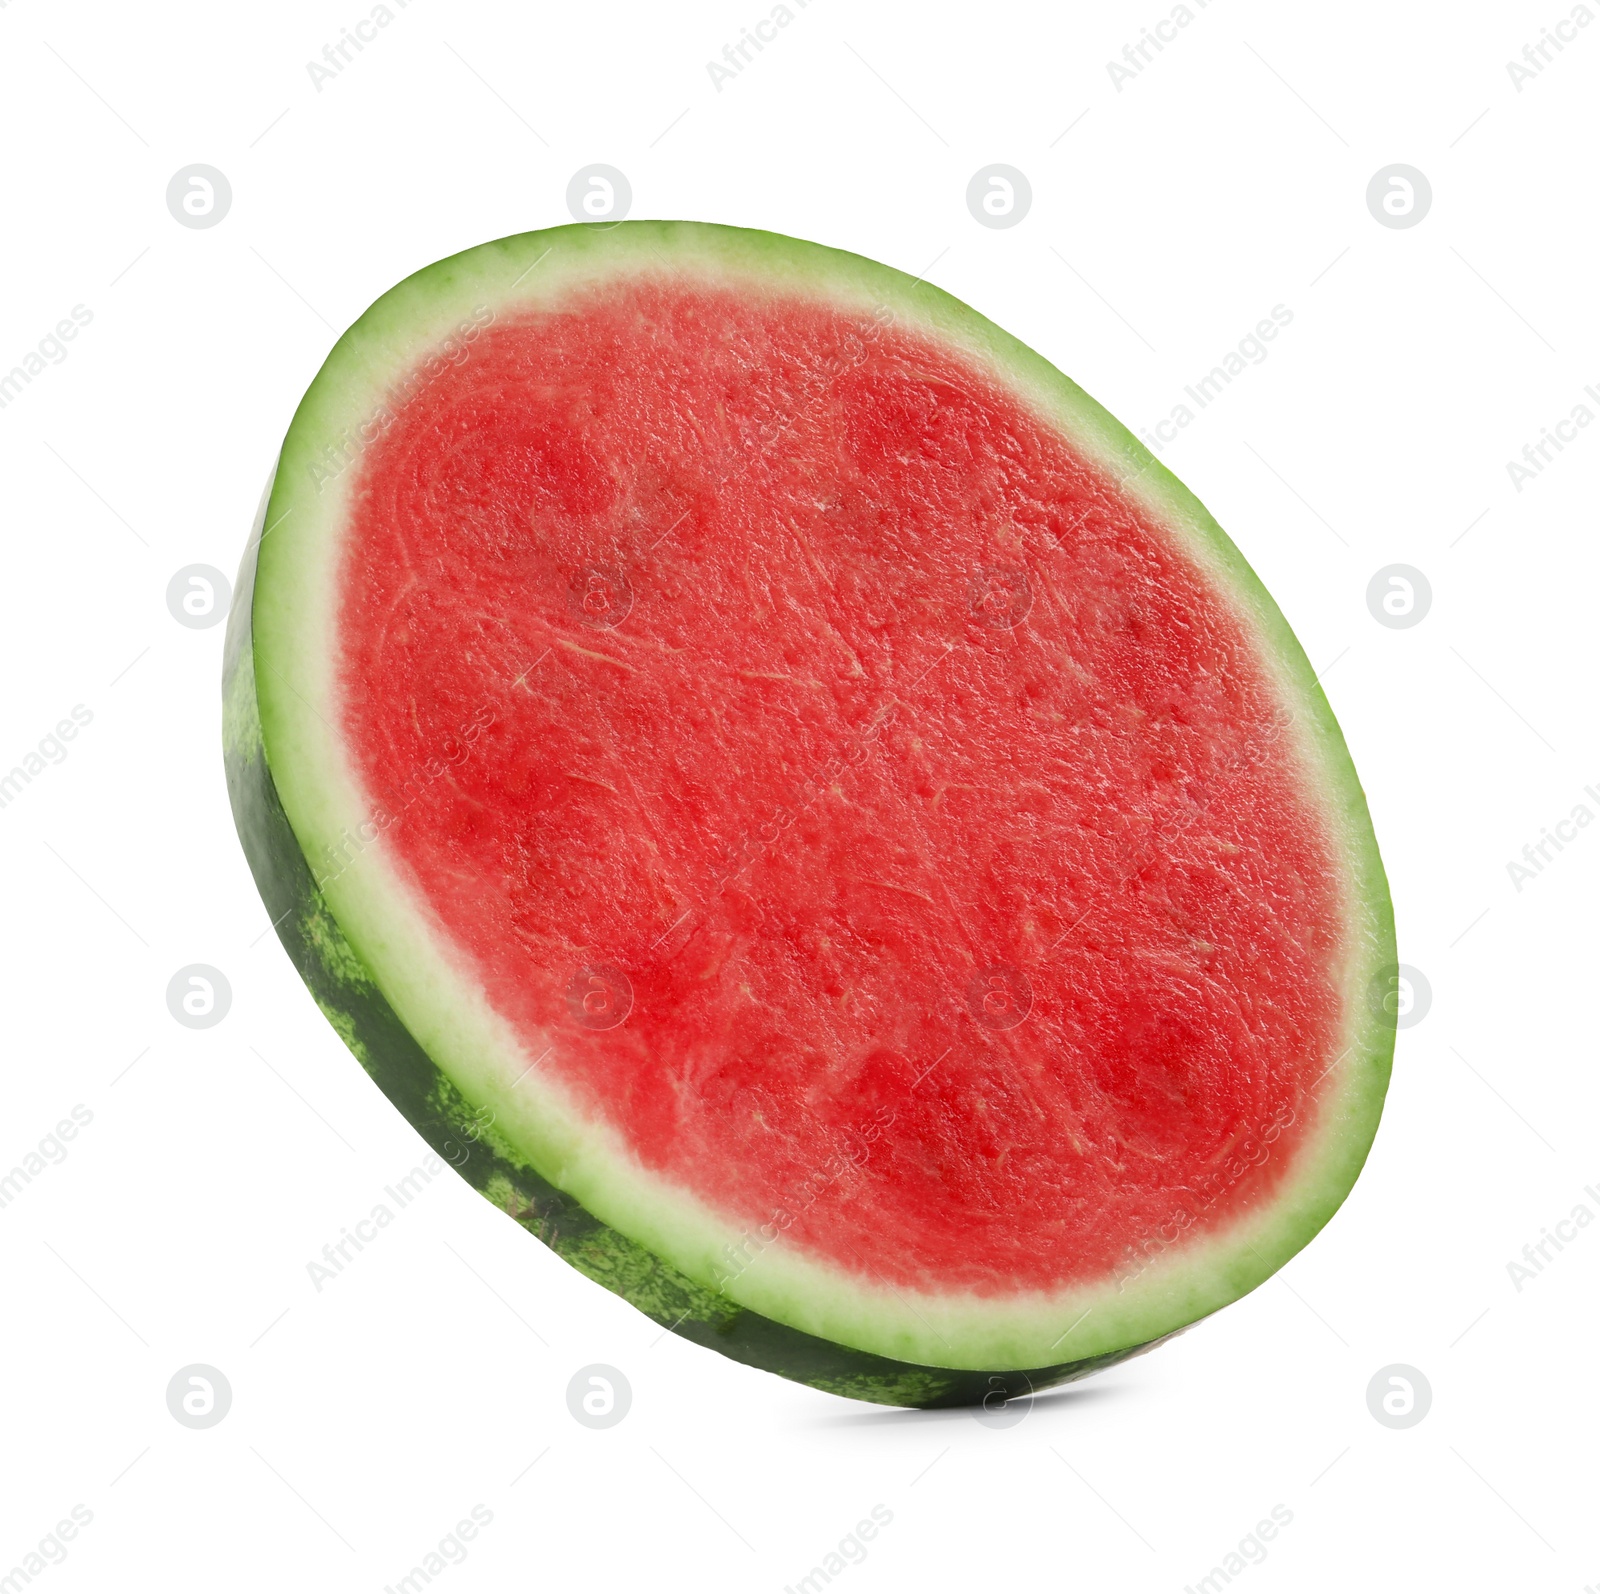 Image of Piece of delicious ripe seedless watermelon isolated on white